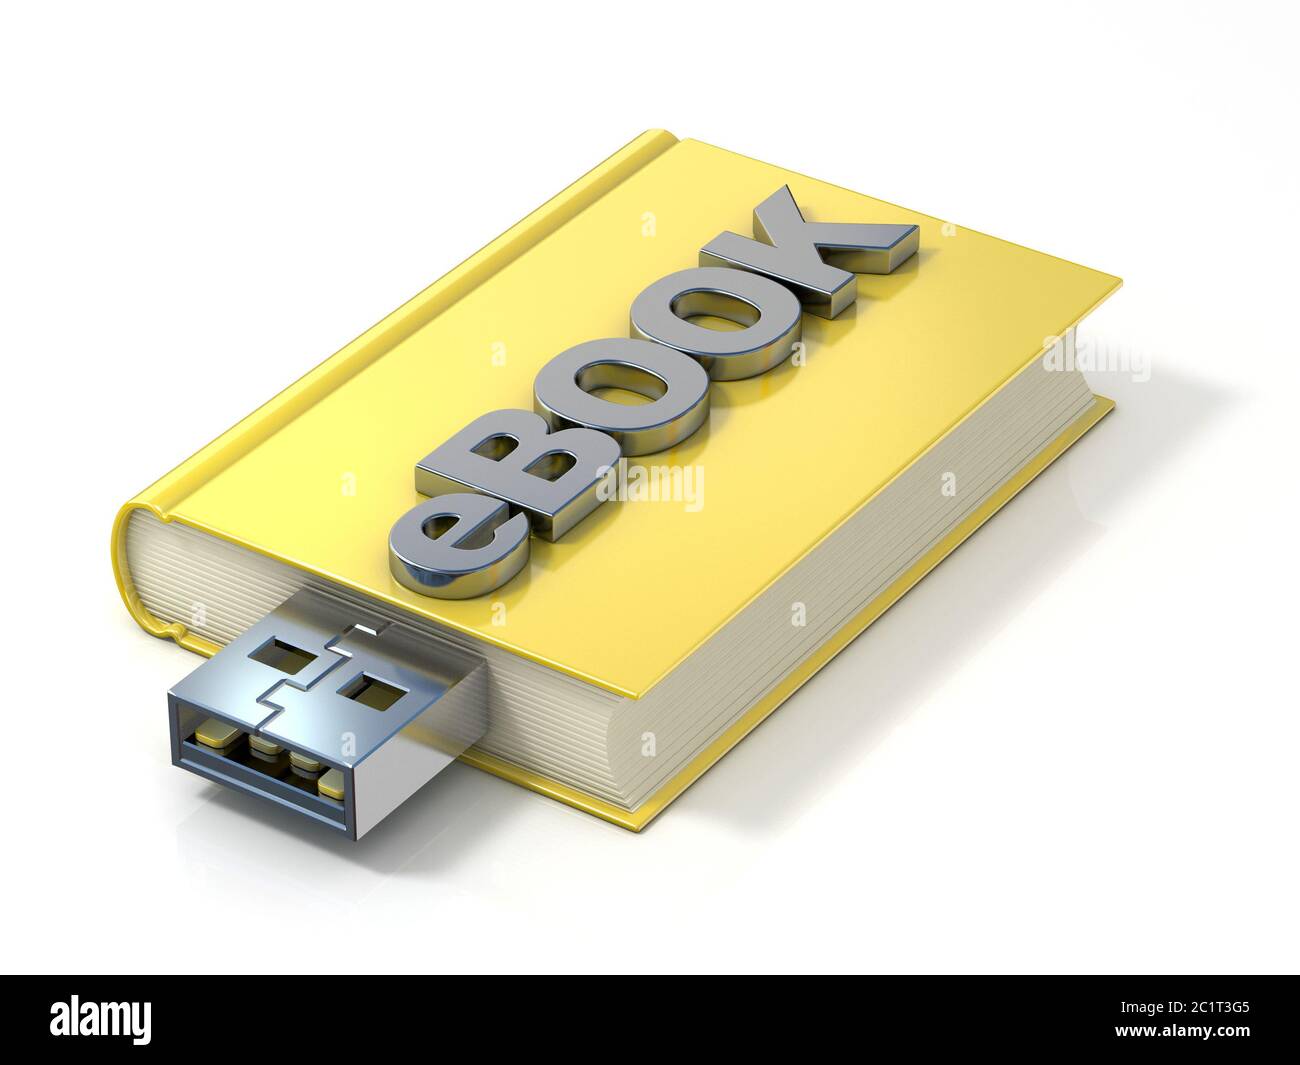 Page 16 - Plugin High Resolution Stock Photography and Images - Alamy